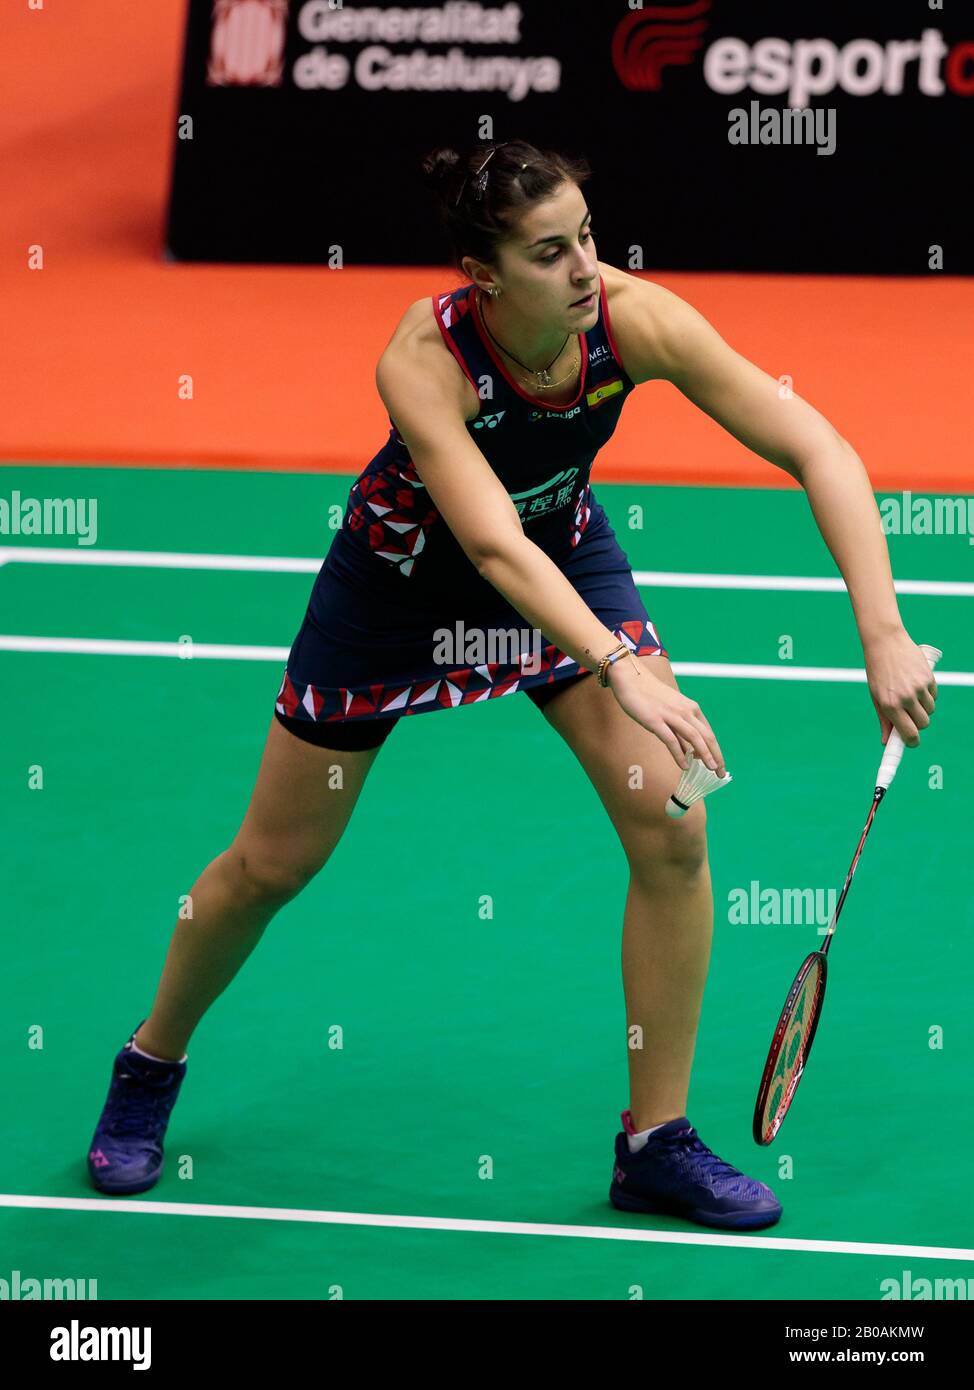 Carolina Marin of Spain competes in the Women's Singles qualification Round  1 match against Natalia Perminiova of Russia on day two of the Barcelona  Spain Master at Vall d'Hebron Olympic Sports Centre